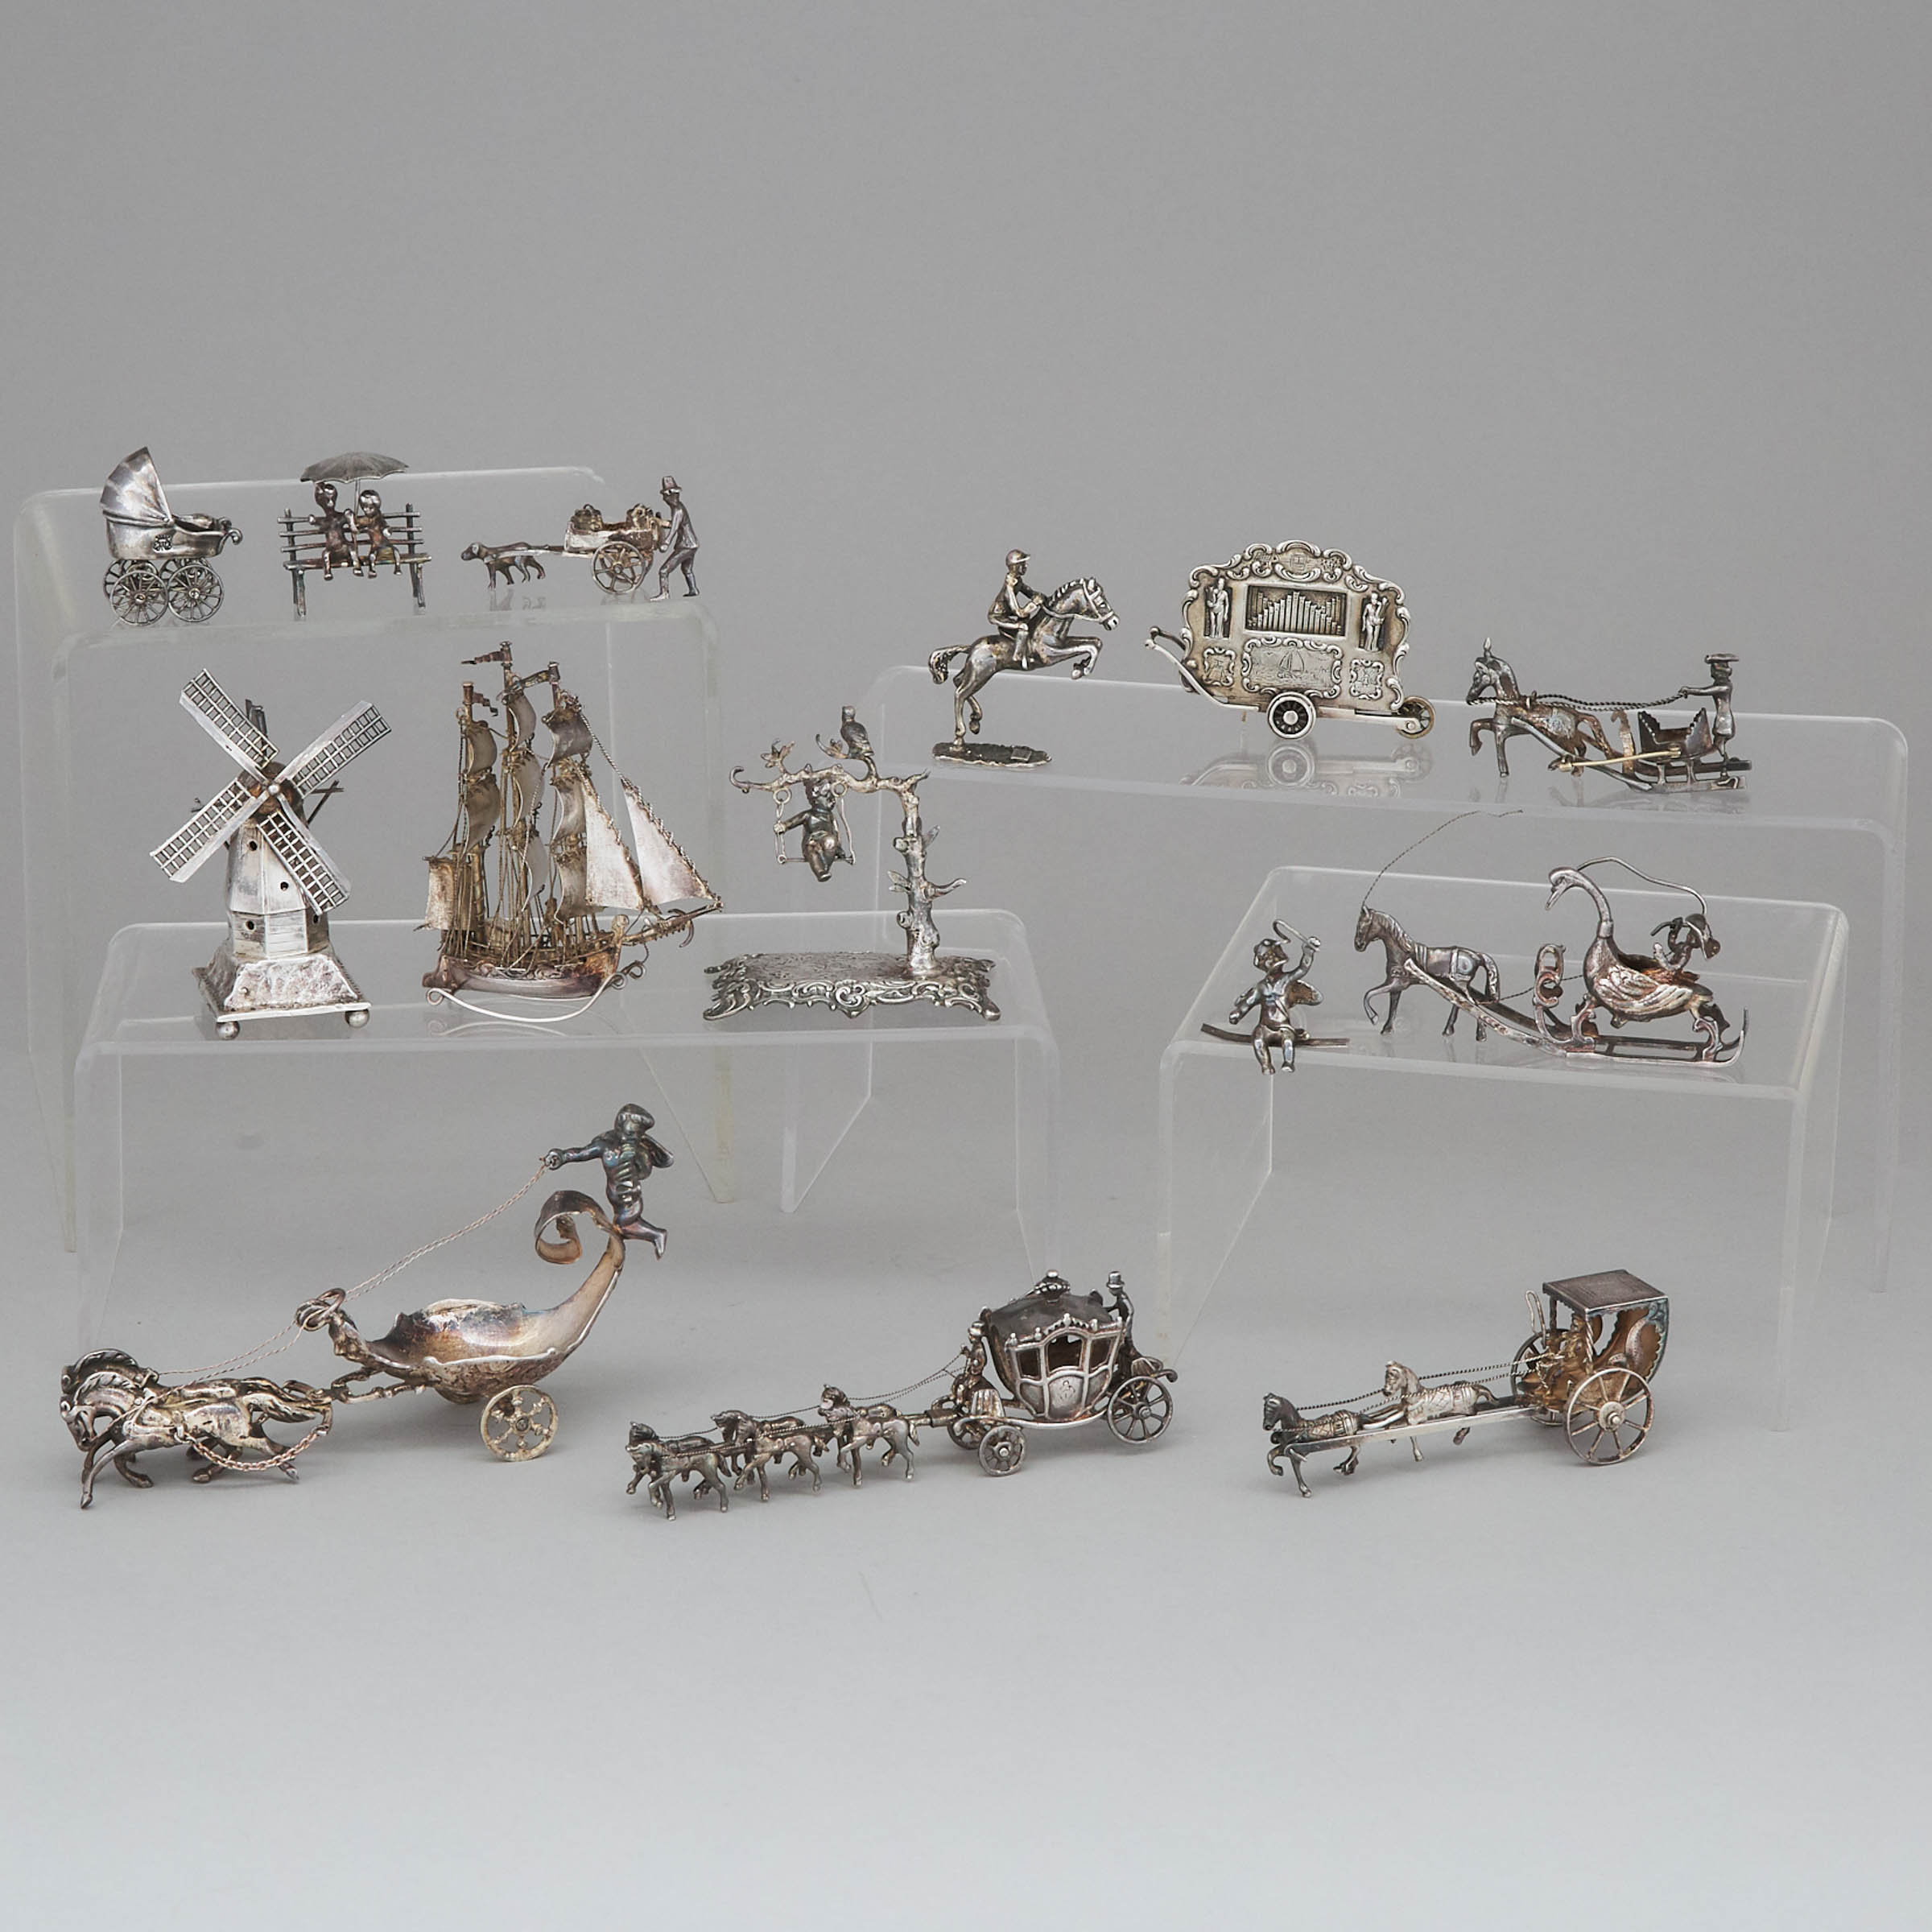 Collection of Thirteen Dutch Silver Miniature Figure and Novelty Groups, 20th Century